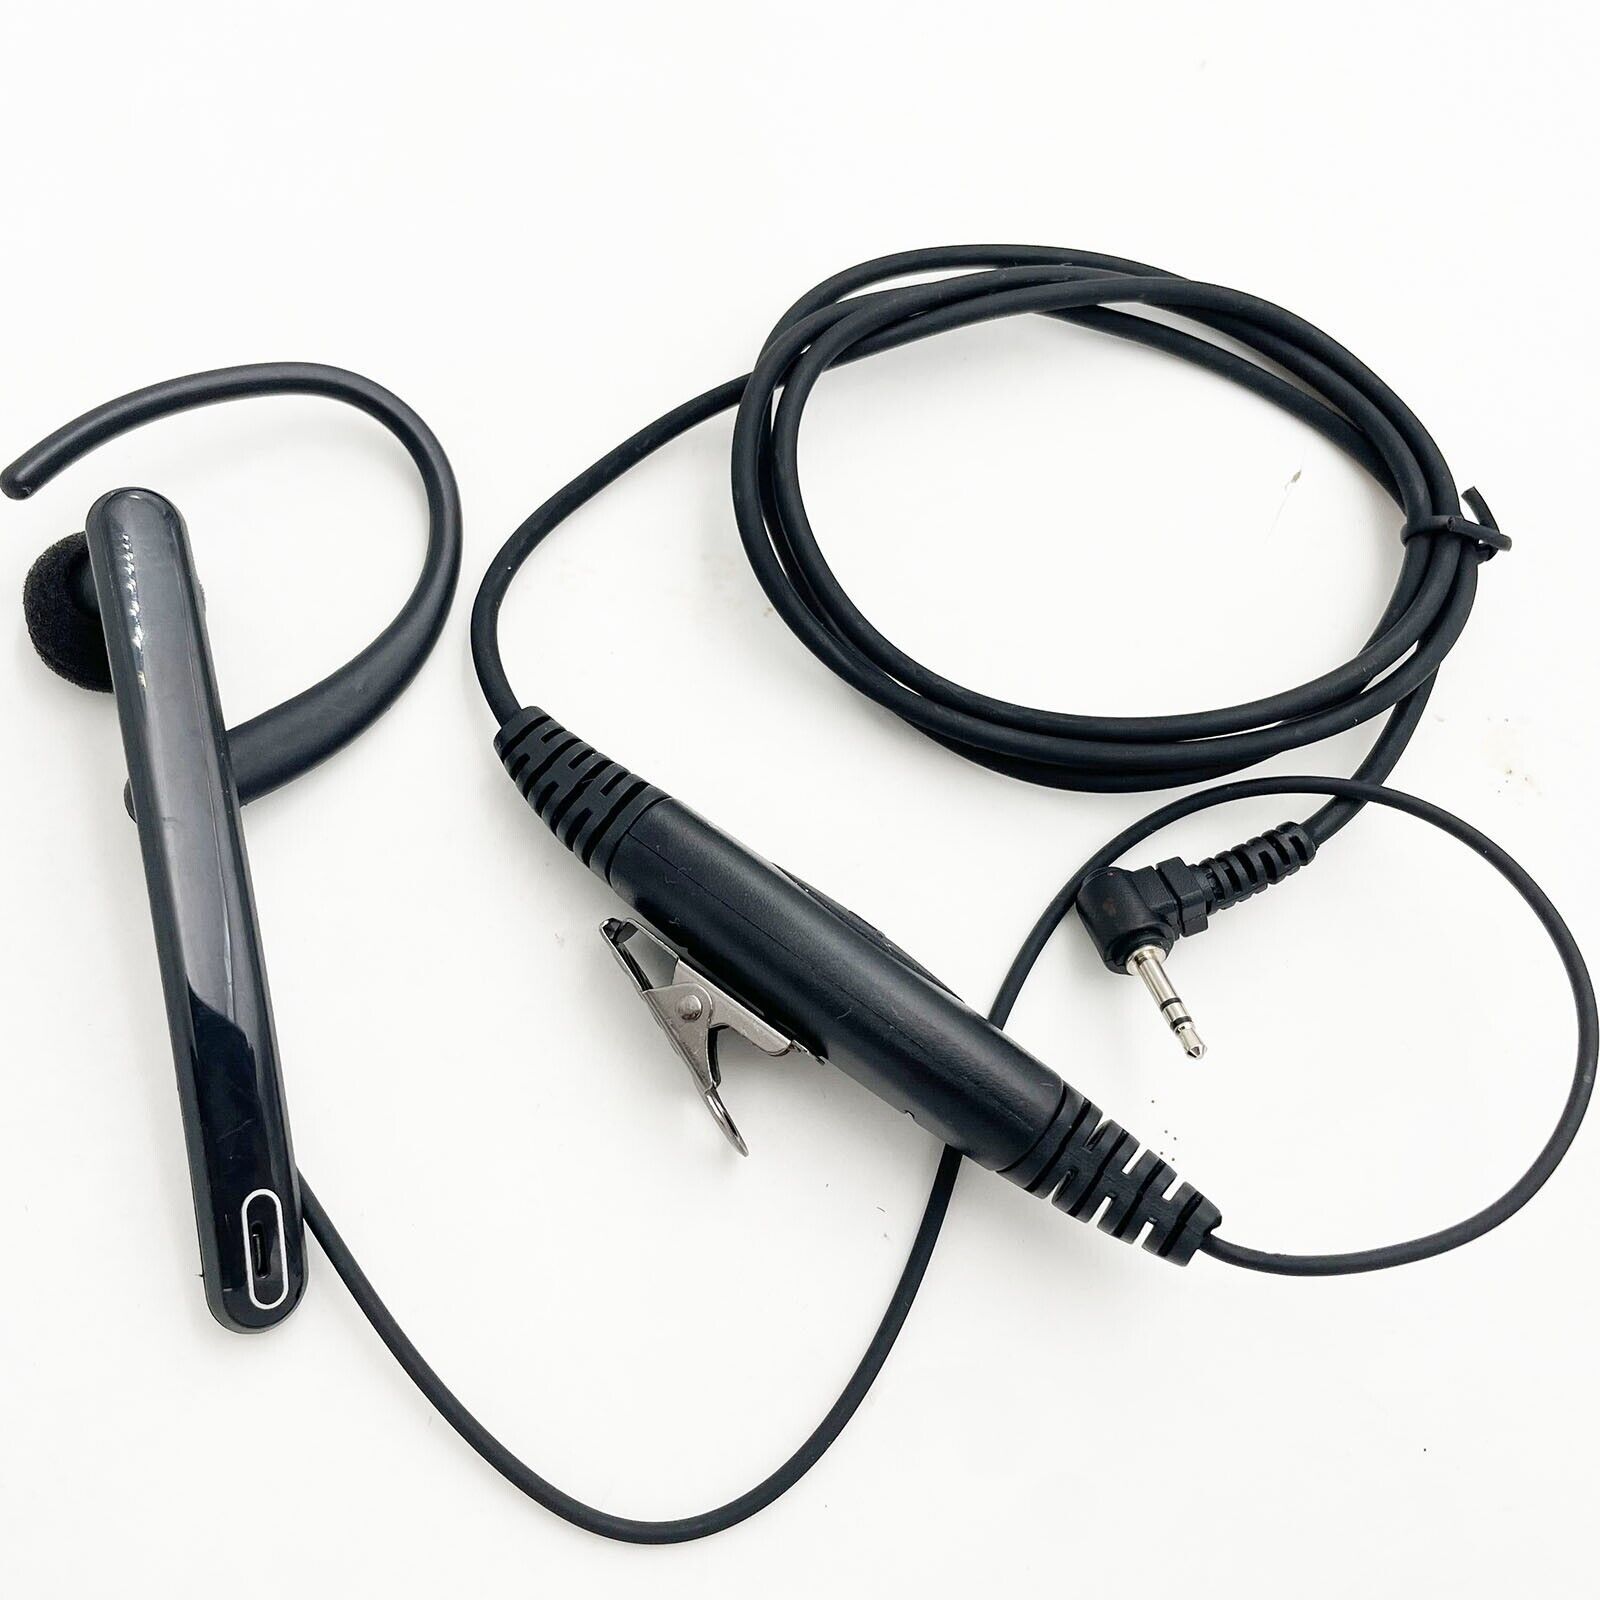 Primary image for Clip Ear Headset/Earpiece Boom Mic 2 Way Radio Hand Free